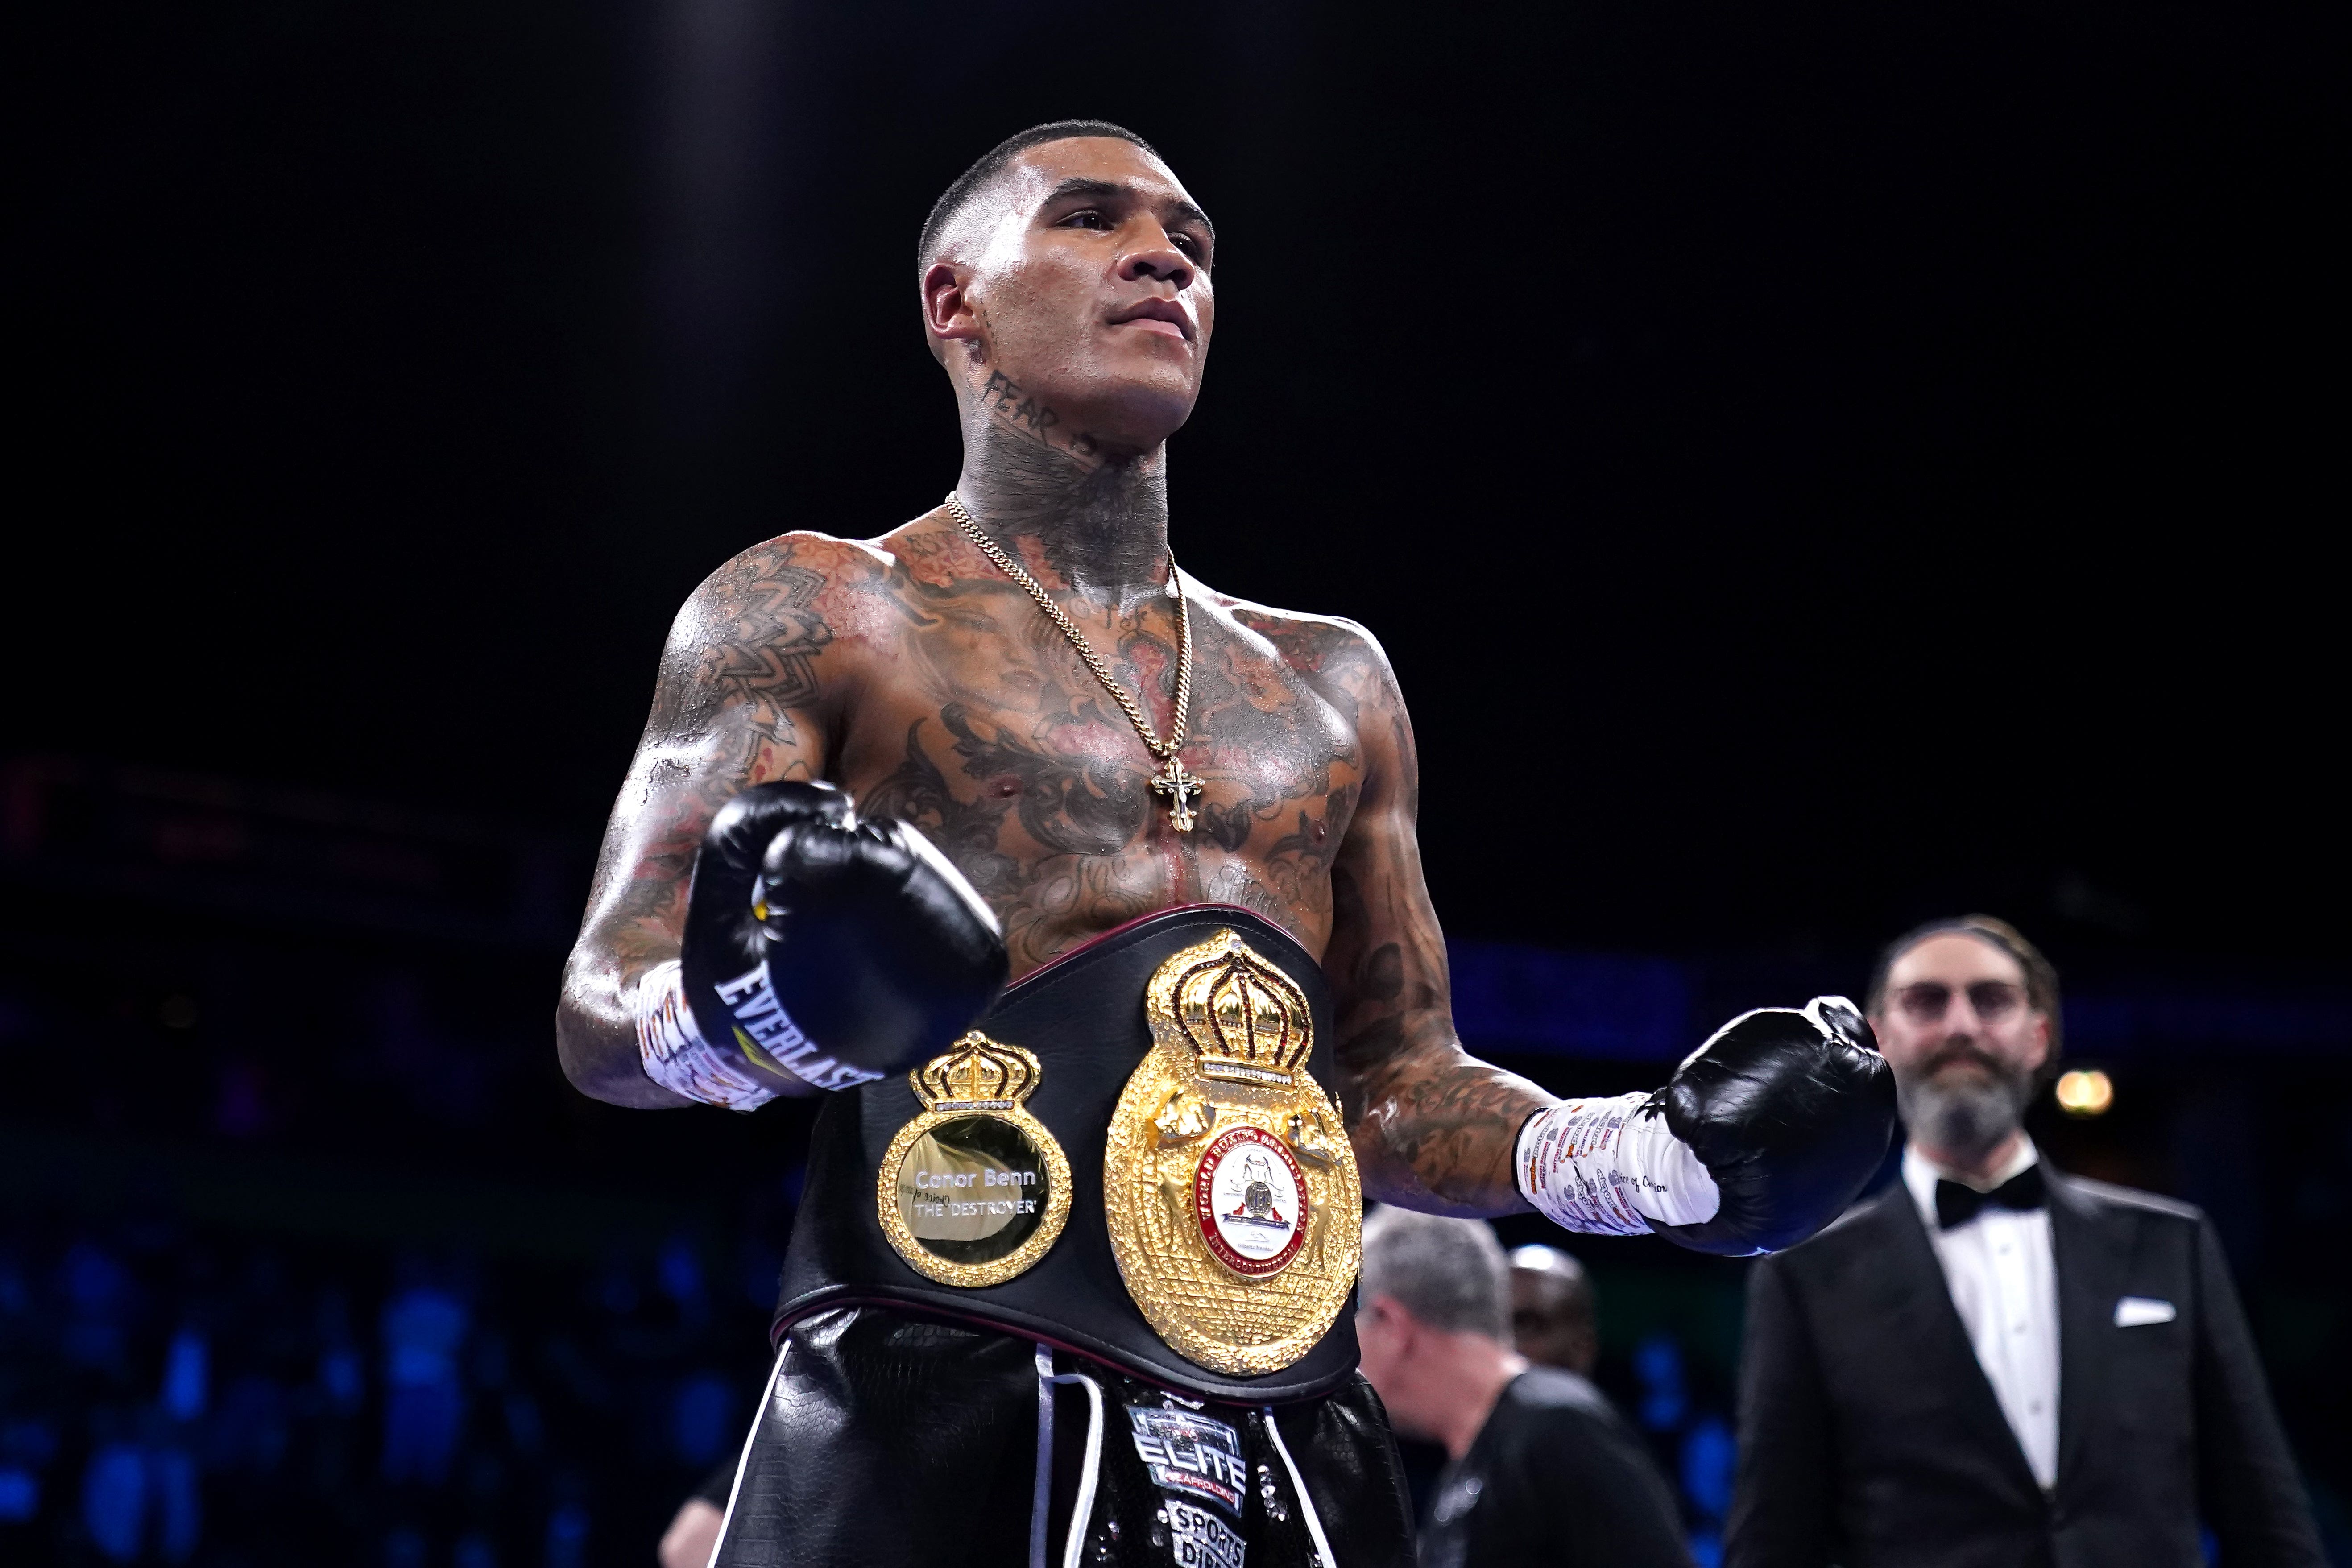 Conor Benn’s career was thrown into turmoil in October 2022 after he twice tested positive for the banned drug clomifene